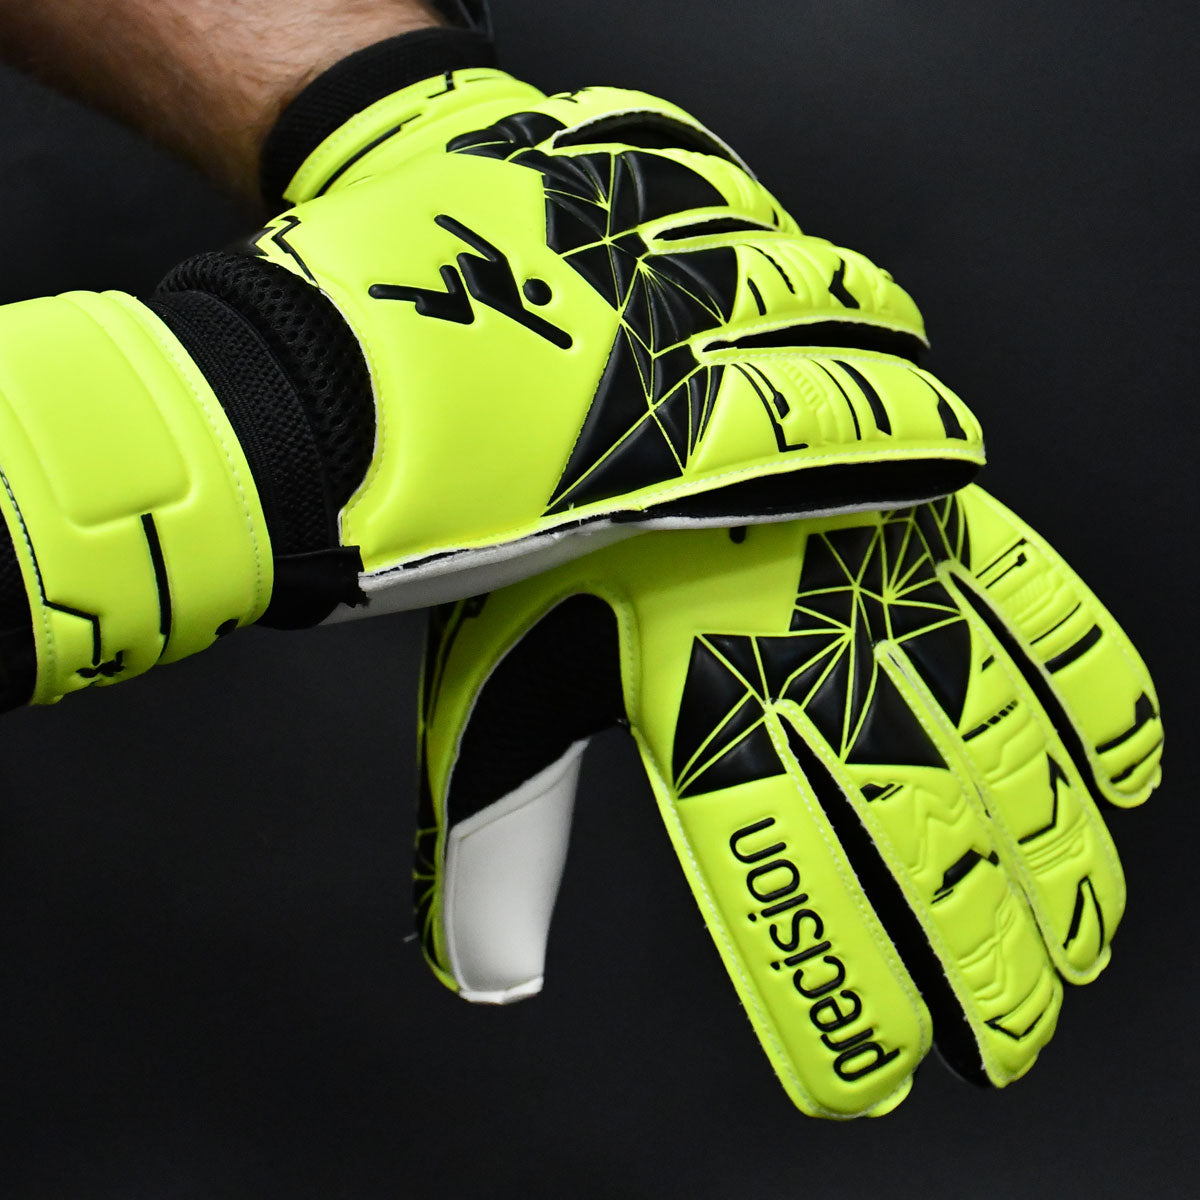 Precision Training Fusion X Flat Cut Essential Goalkeeper Gloves - Youth - Yellow/Black/White